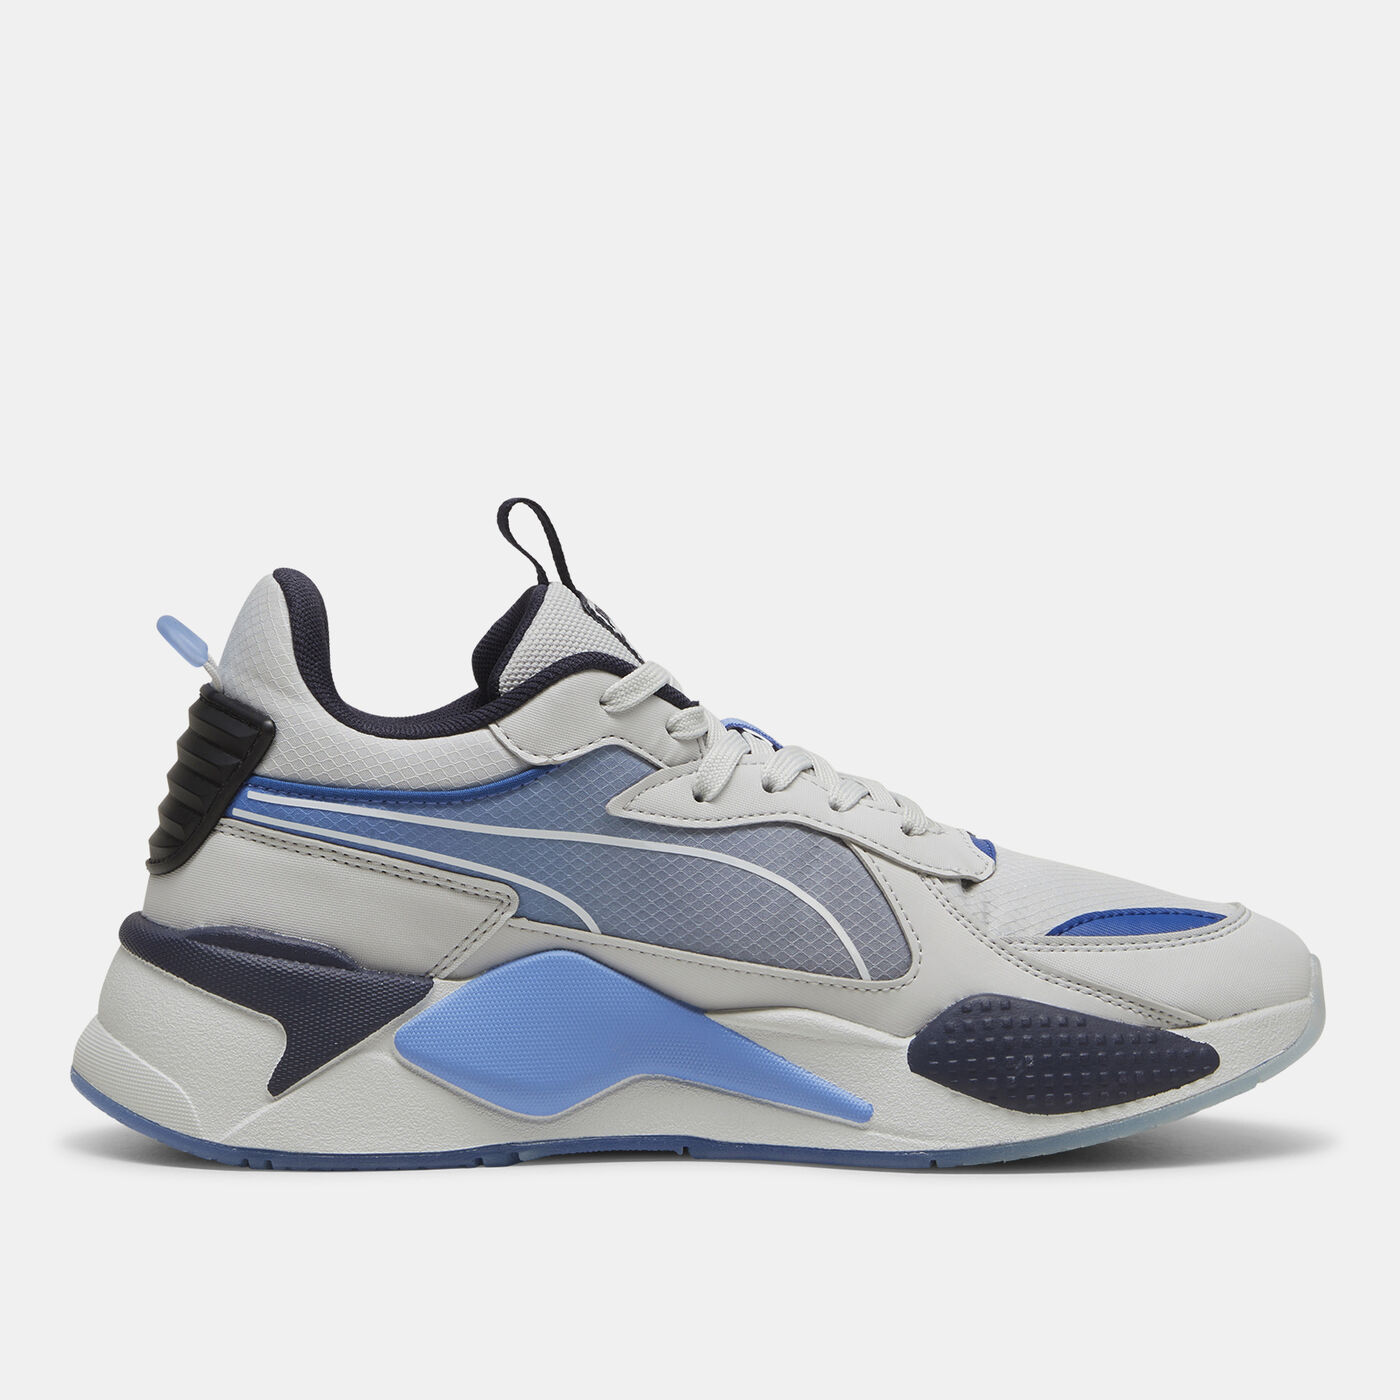 Men's x PLAYSTATION RS-X Shoes